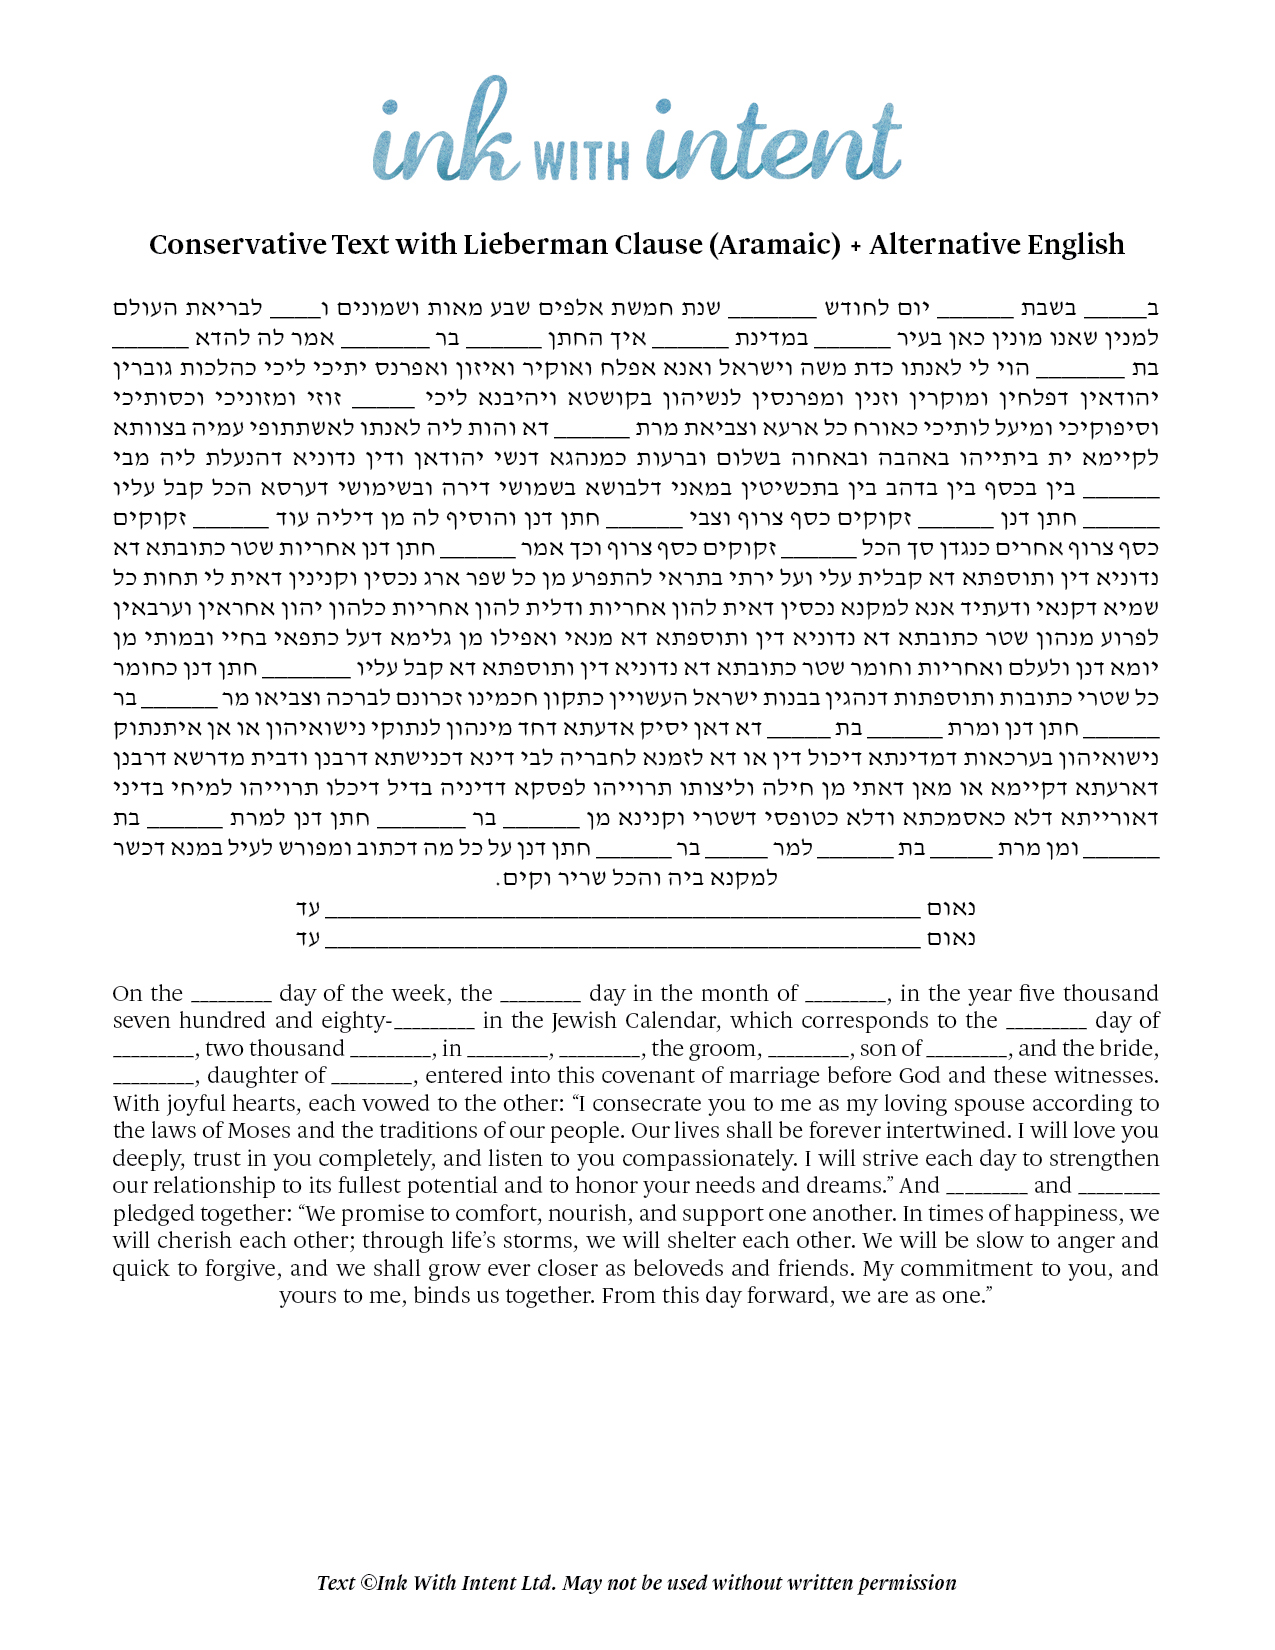 Conservative with Lieberman Clause Ketubah Text + Alternative English